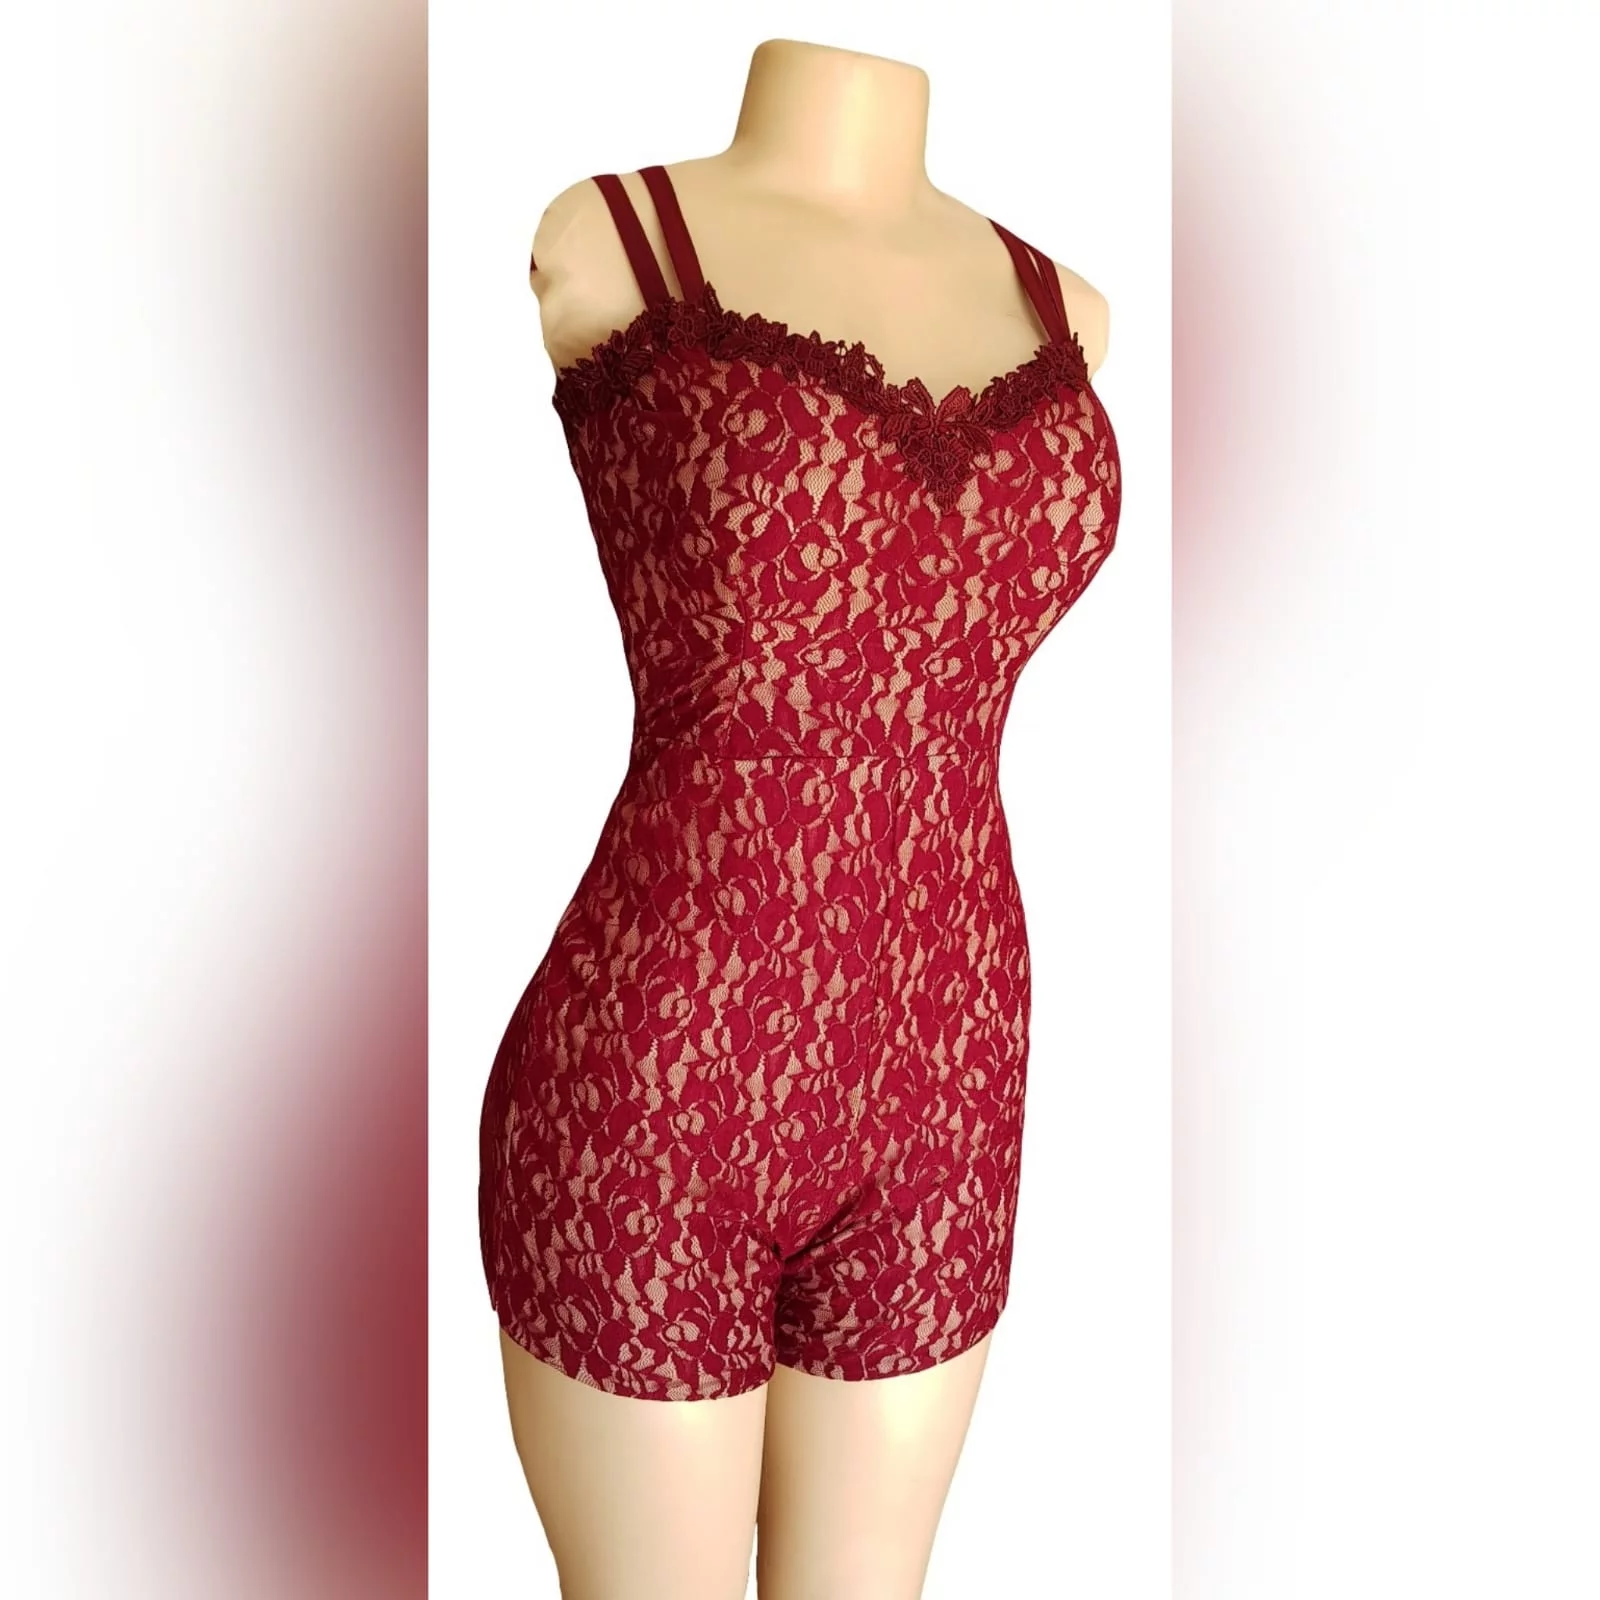 Versatile 2 piece maroon dress 5 <blockquote>to shine your brightest light is to be who you truly are. Roy t. Bennett</blockquote> a versatile 2 piece maroon dress. A lace short leg bodysuit with a sweetheart neckline and shoulder straps. With a removable flowy chiffon skirt with a slit.